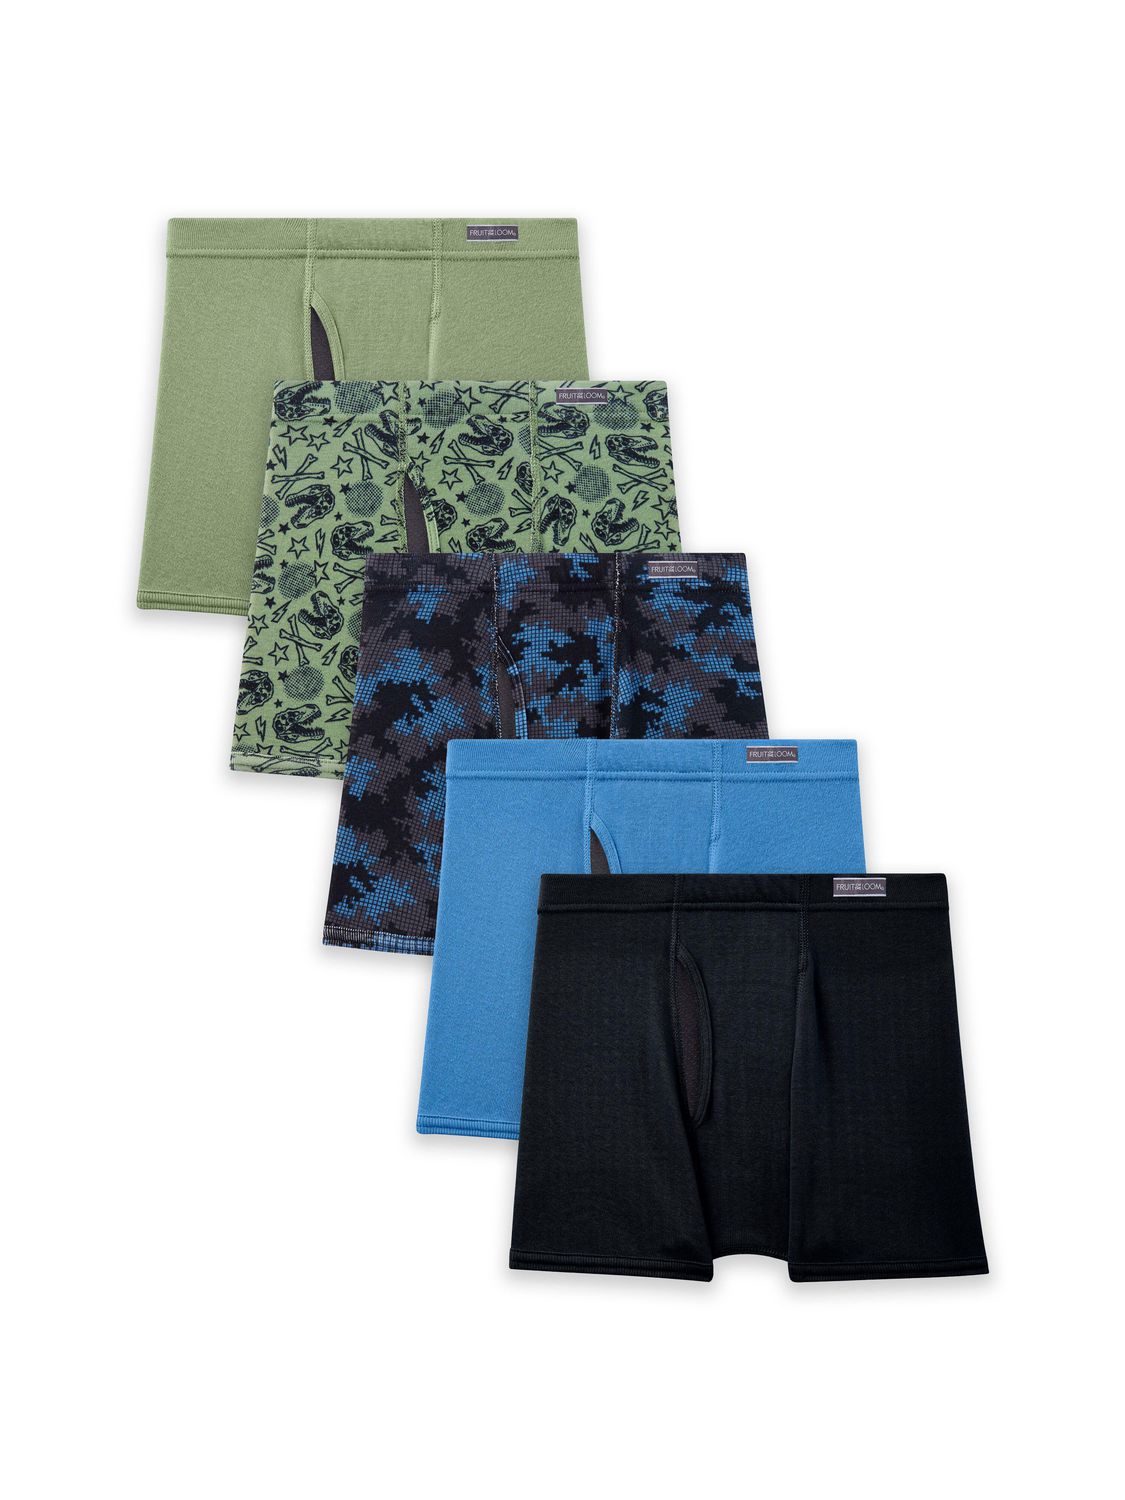 Fruit of the Loom Boys' Tag Free 3-Pack Boxer Briefs - Assorted Prints -  Loral Boutique